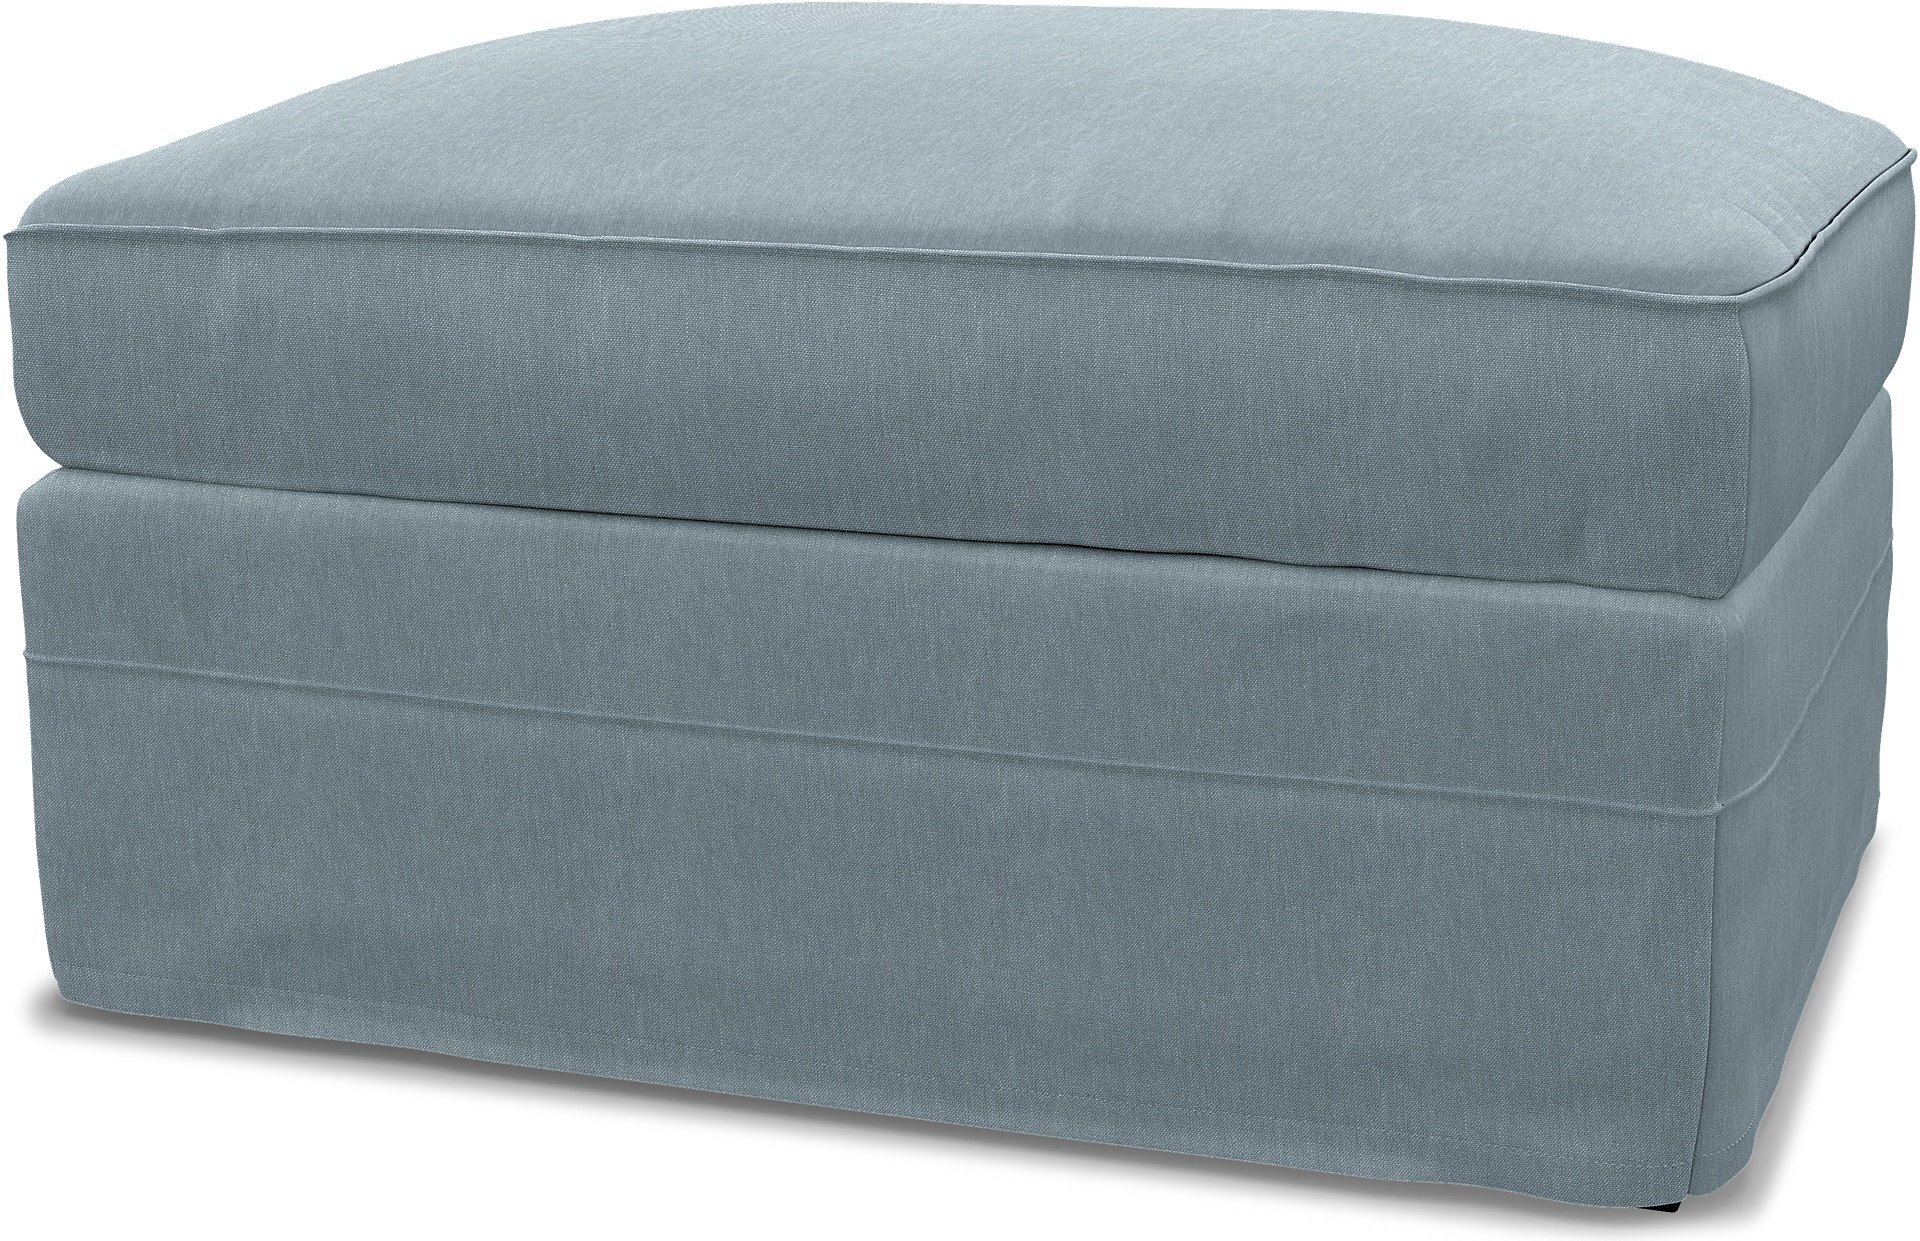 IKEA - Gronlid Footstool with Storage Cover, Dusty Blue, Linen - Bemz